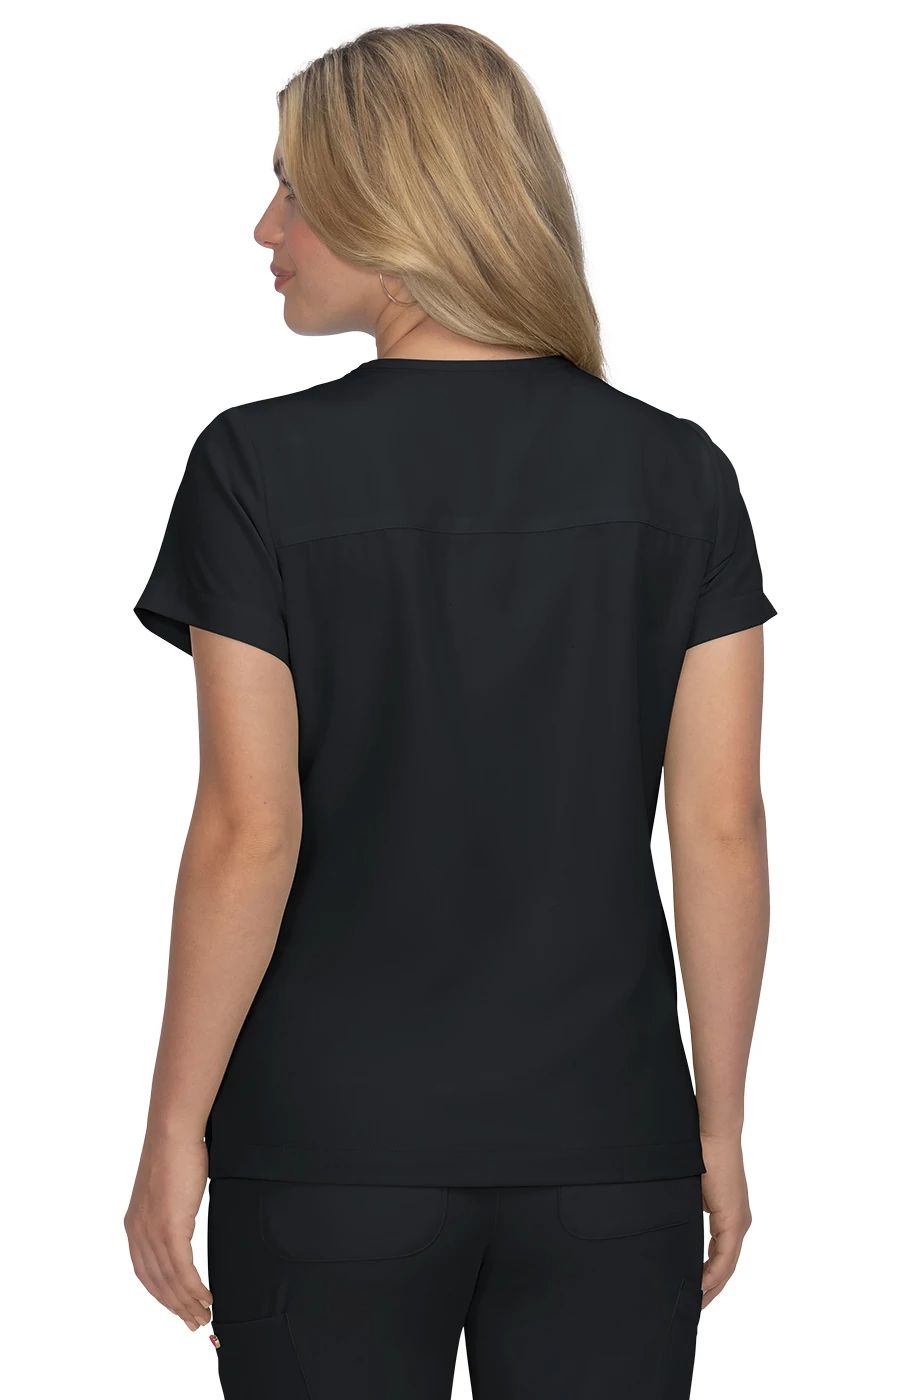 rosemary-top-limited-edition-black